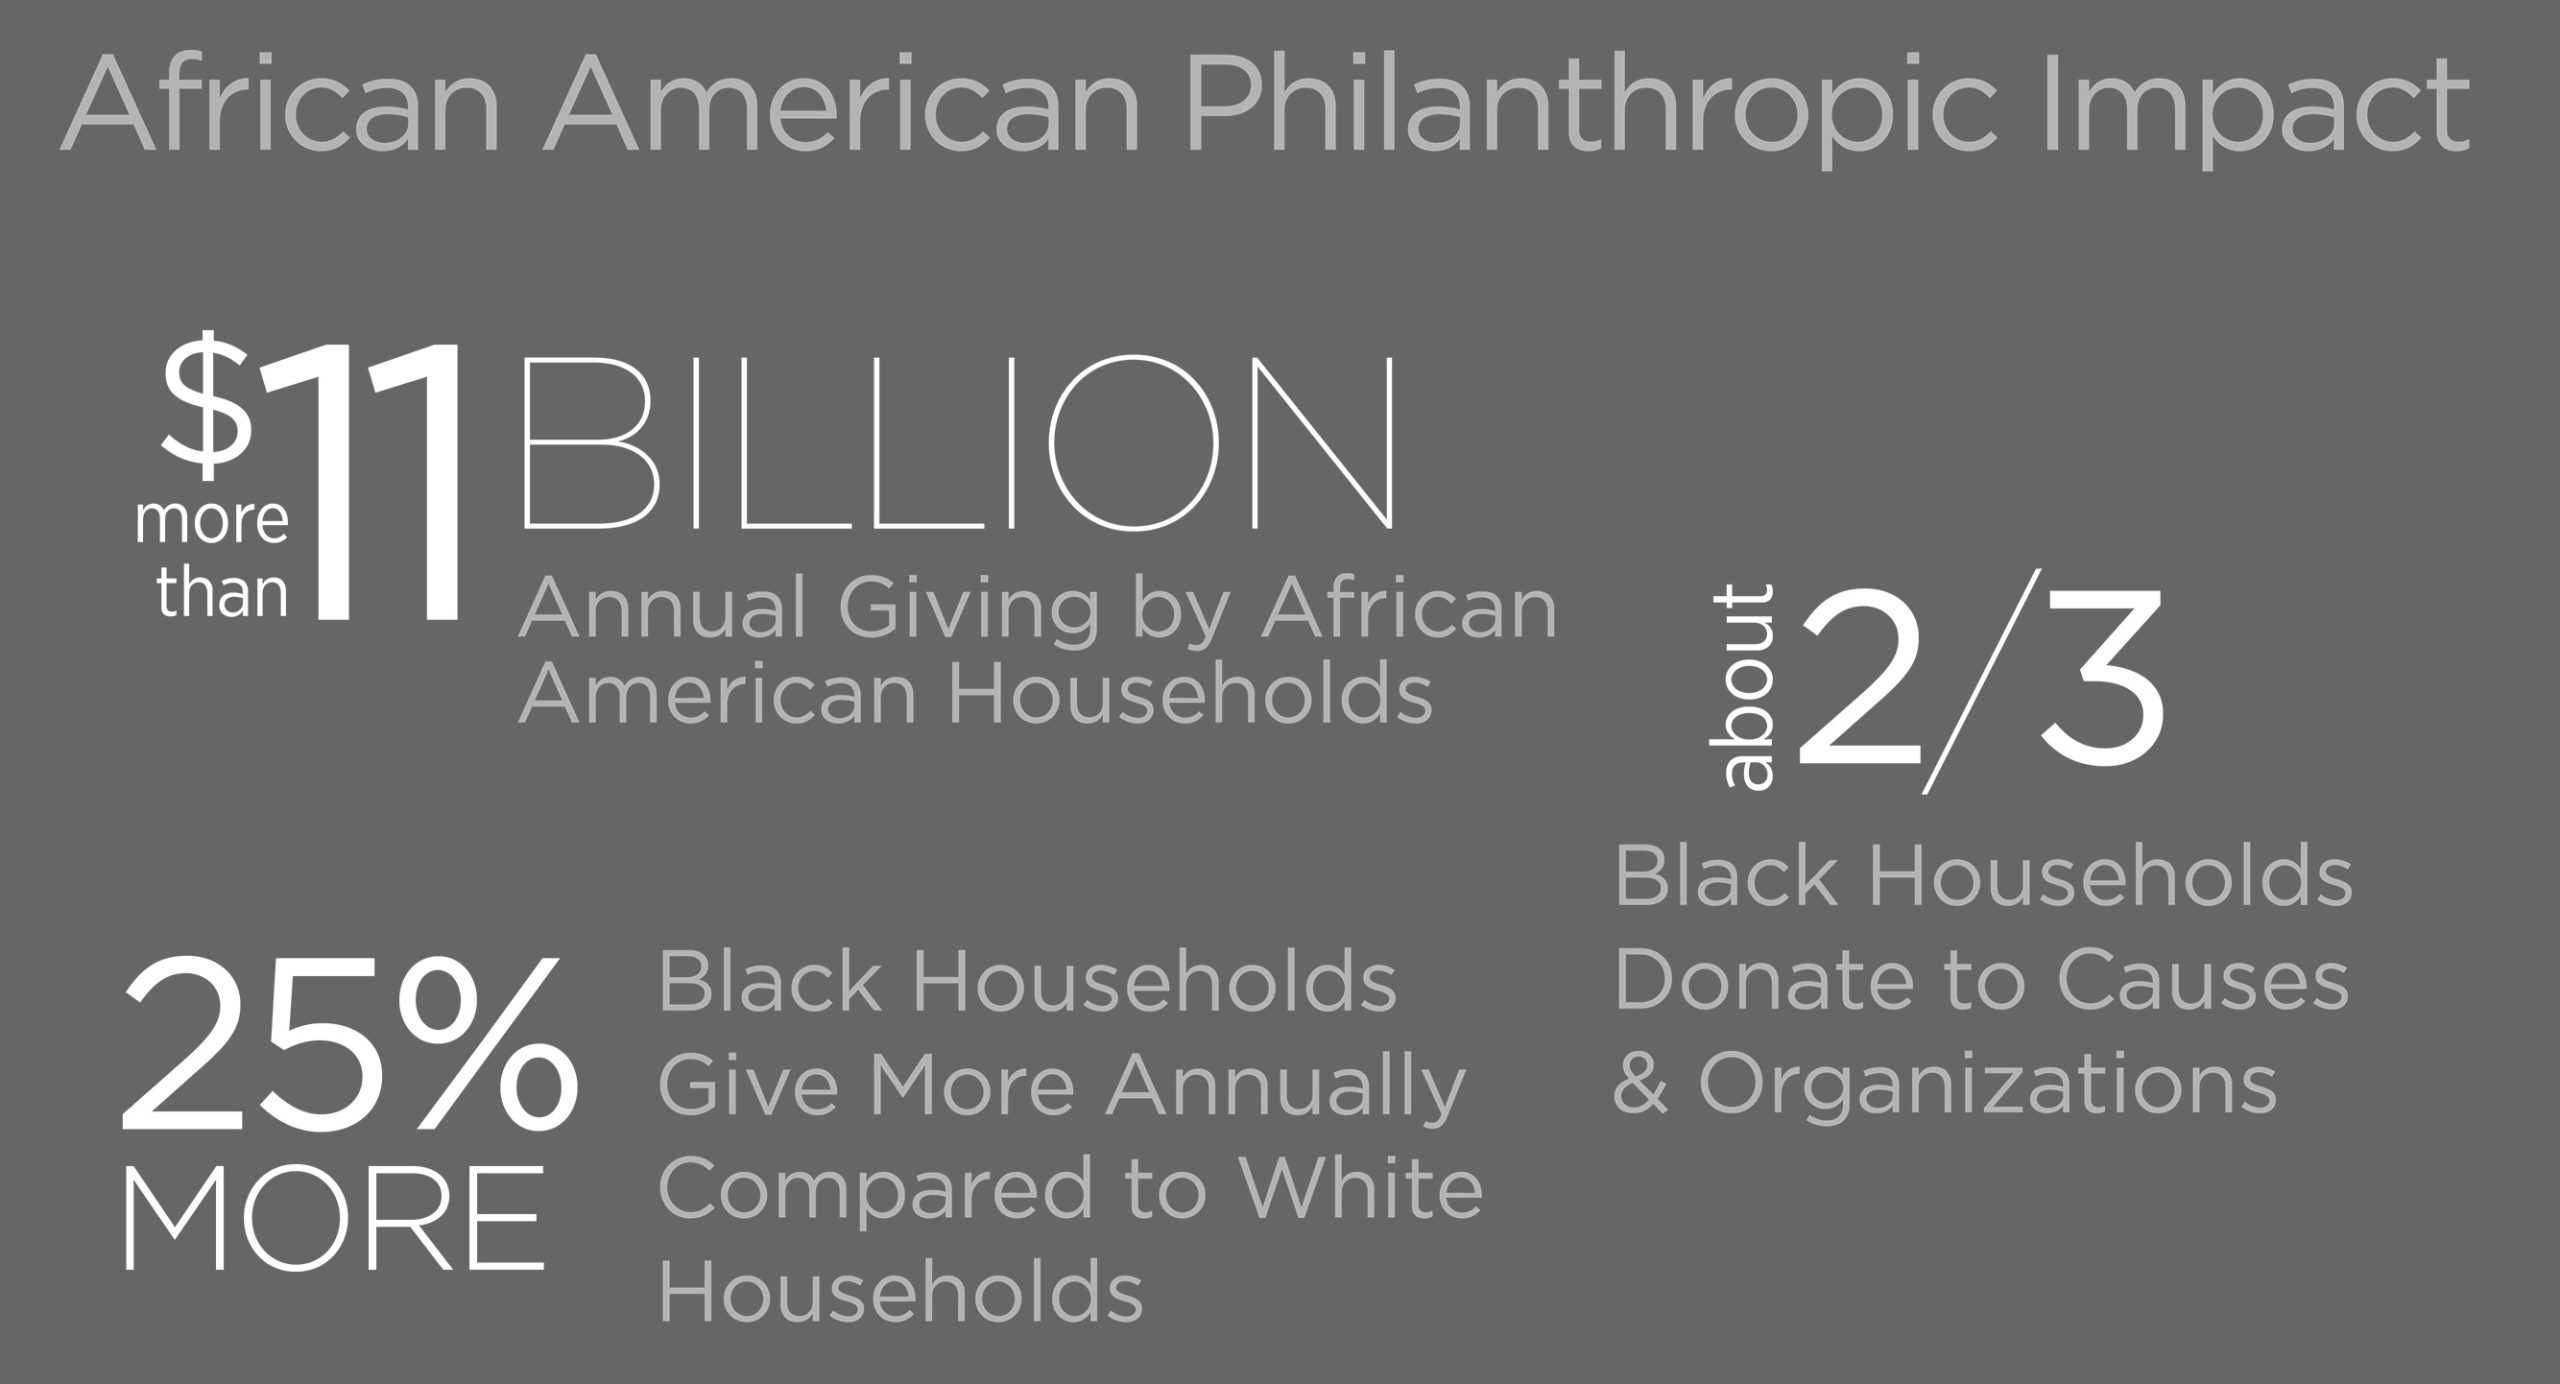 African American Philanthropic Impact: More than $11 Billion Annual Giving by African American Households 25% more Black Households give more annually compared to white households About 2/3 of Black Households donate to causes and organizations